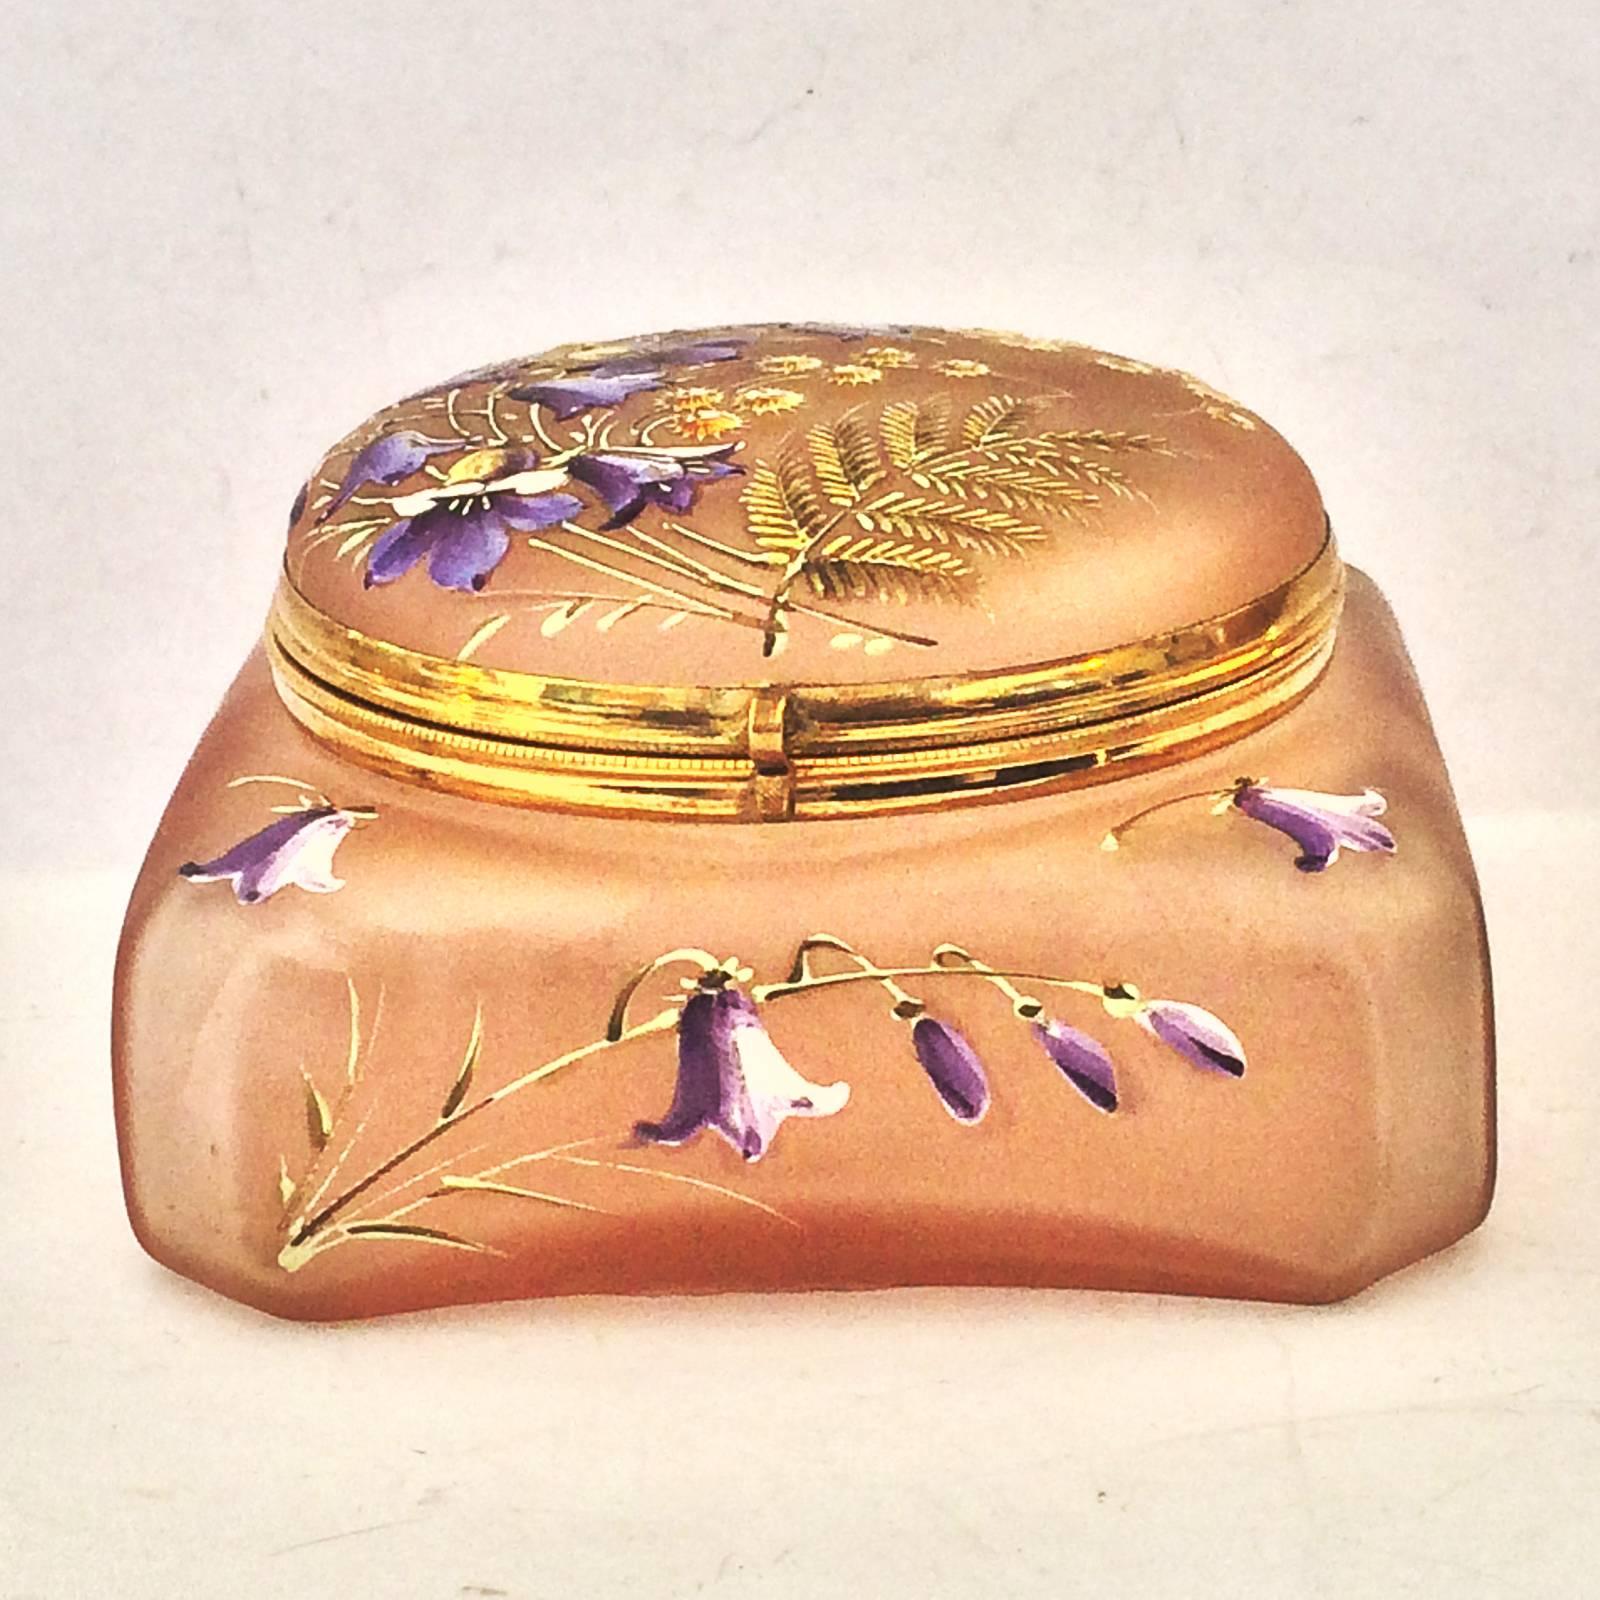 Art Deco, finely detailed Bonbonniere Box, brilliantly enameled in many colors, depicting Blue Bells, Ferns and sprigs of Golden little Daisies all on a pink glass ground. Probably by Daum of Nancy, or Montjoye. The Bluebells are also featured along